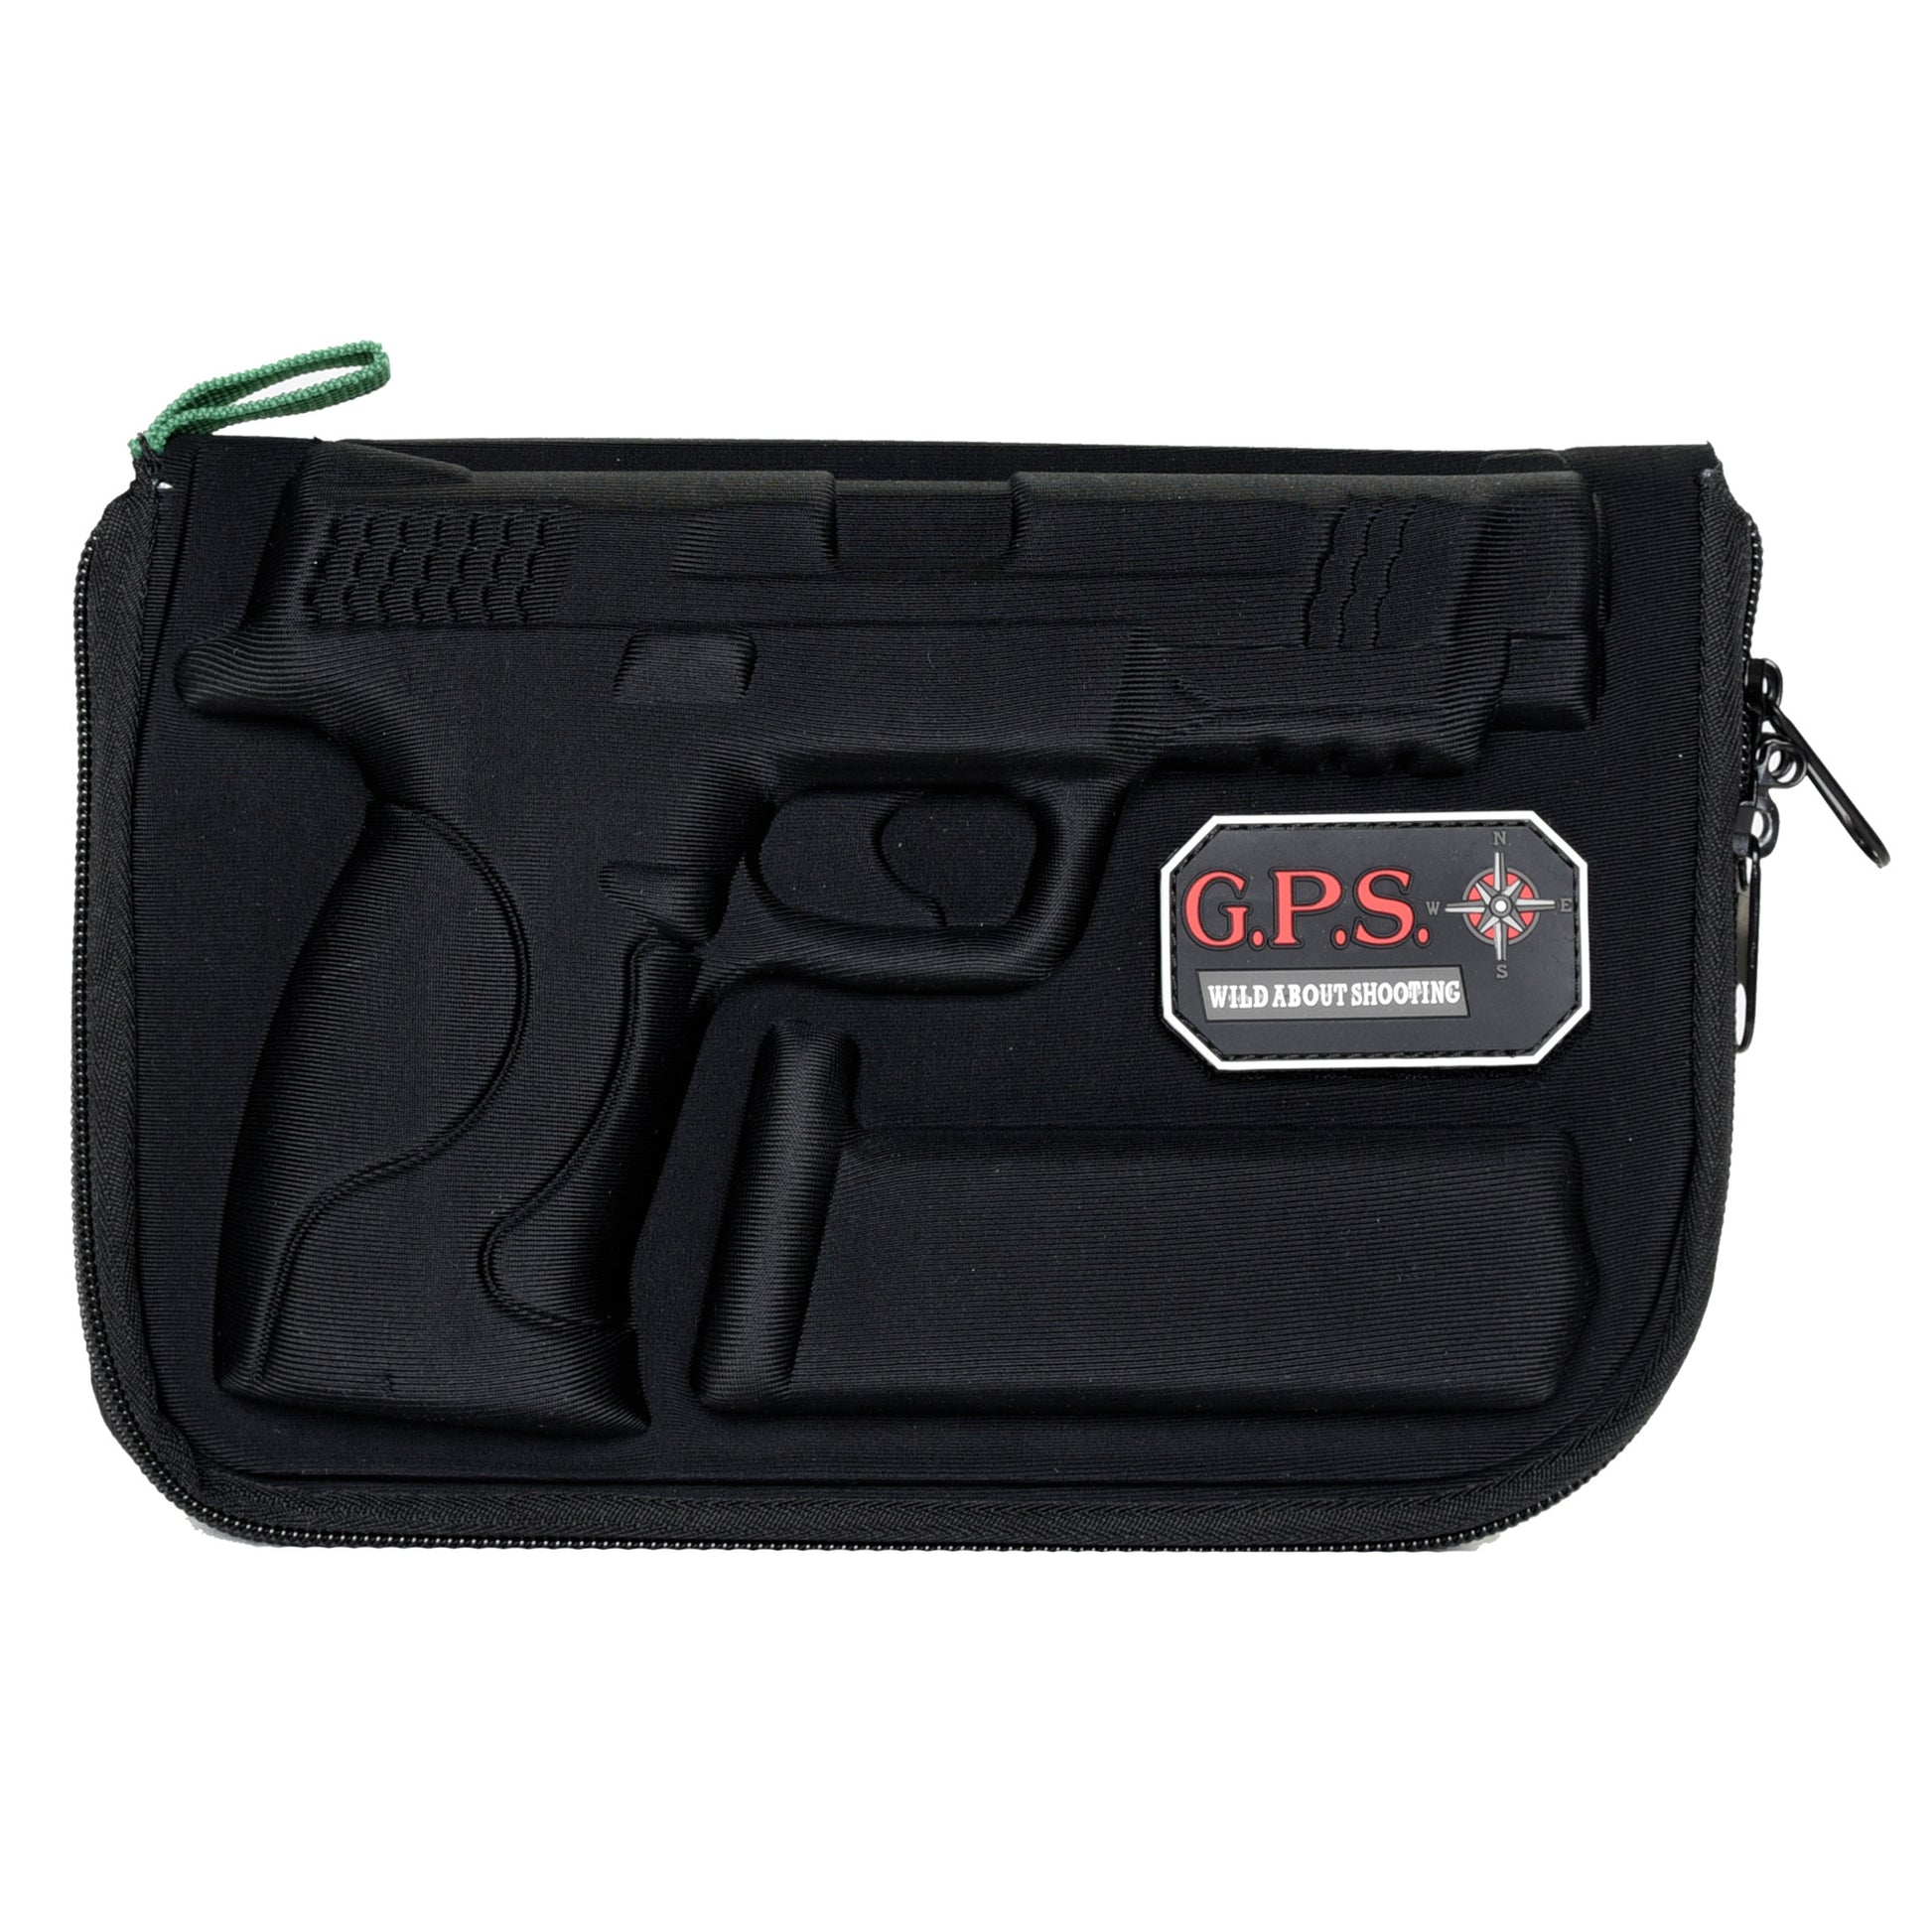 GPS Molded Pistol Case Black Soft for S&W M&P GPS-912PC - California Shooting Supplies